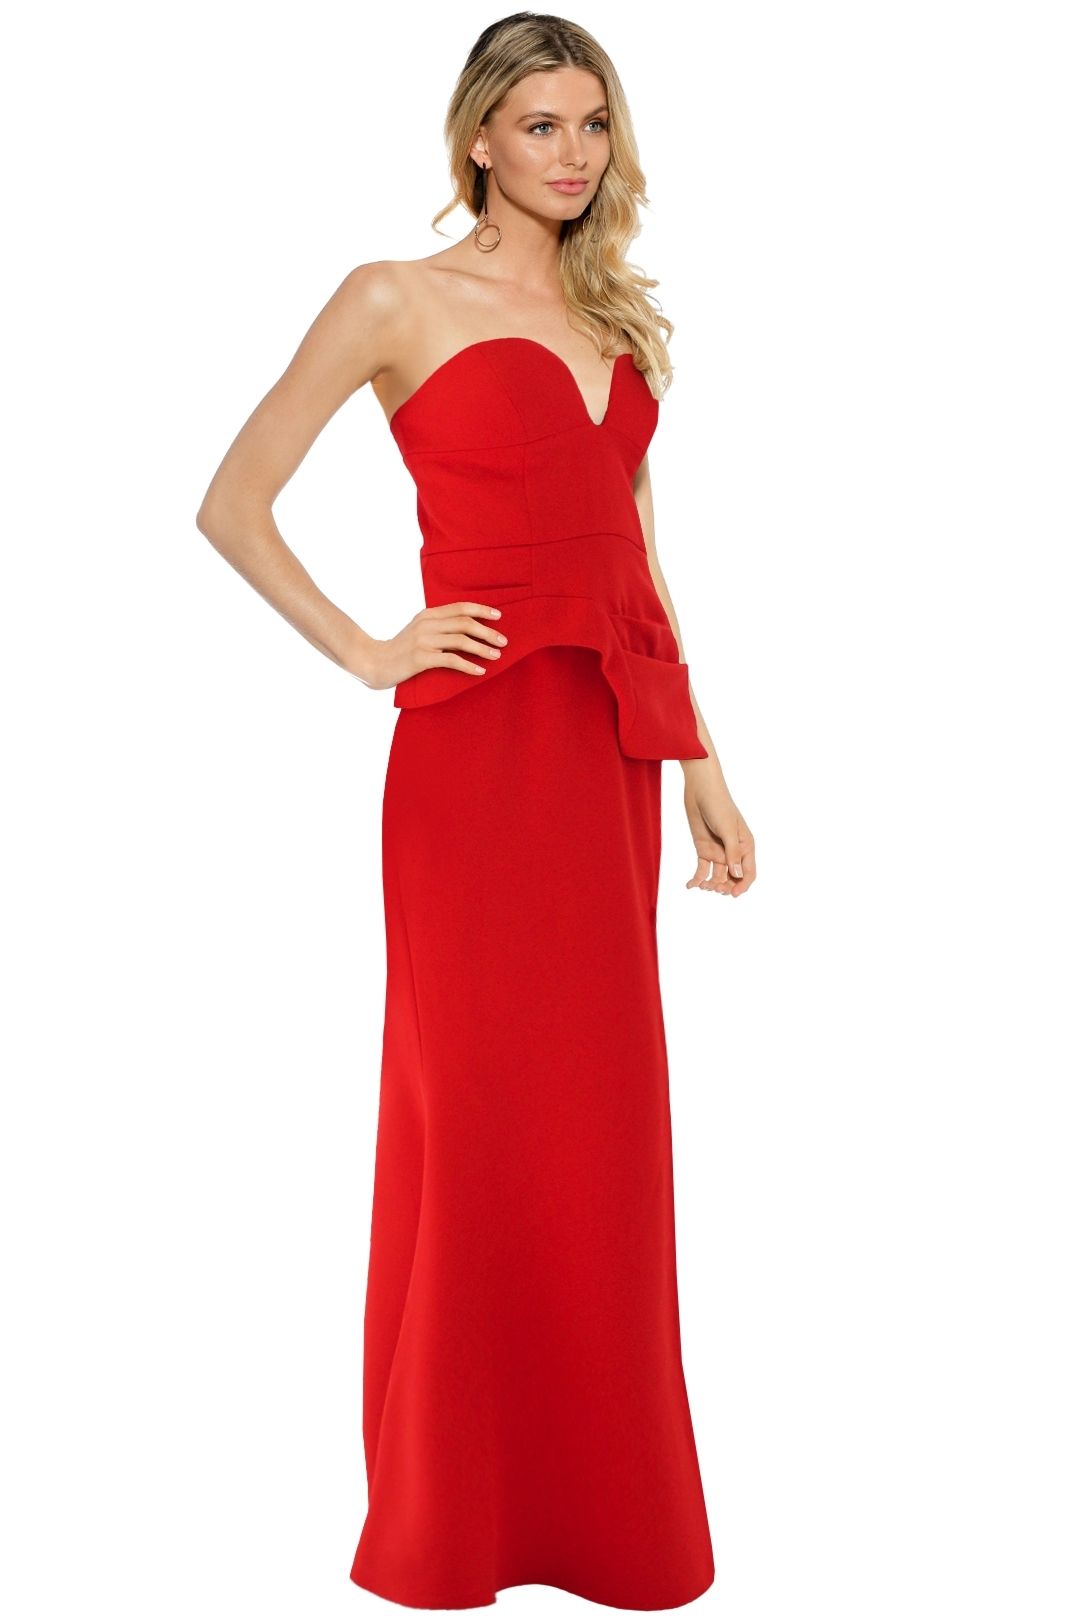 Sheike - Queen of Hearts Maxi Dress - Red - Side